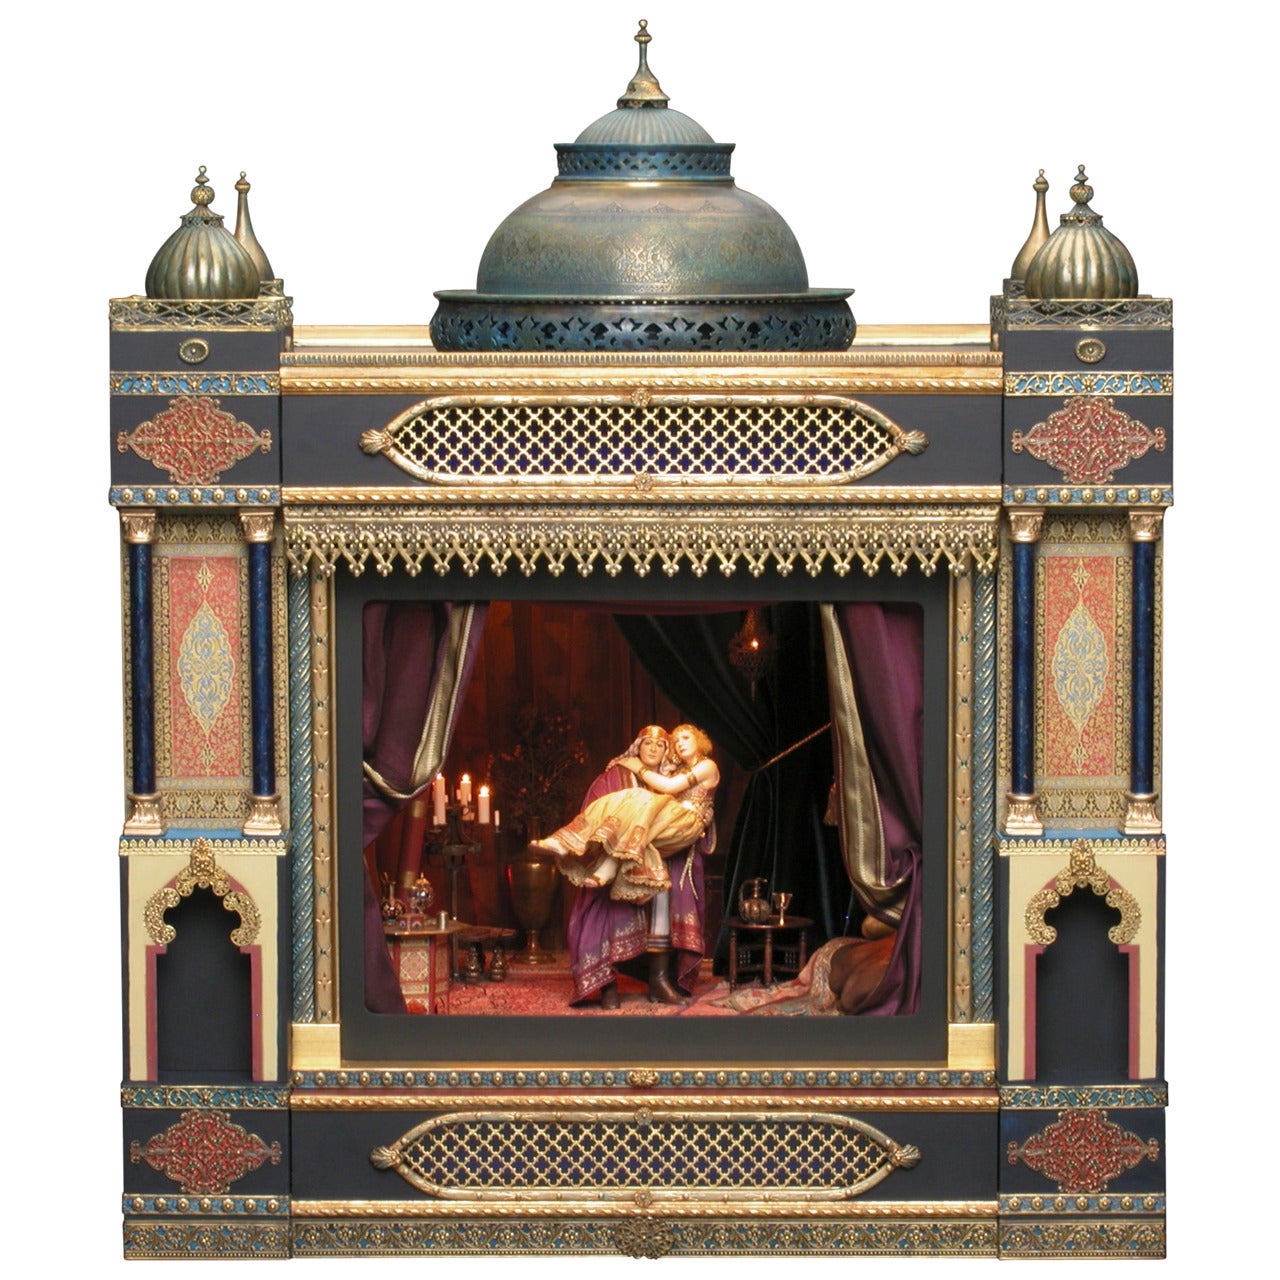 Stunning Miniature "The Alhambra Cinema" with Valentino as the Son of the Sheik For Sale